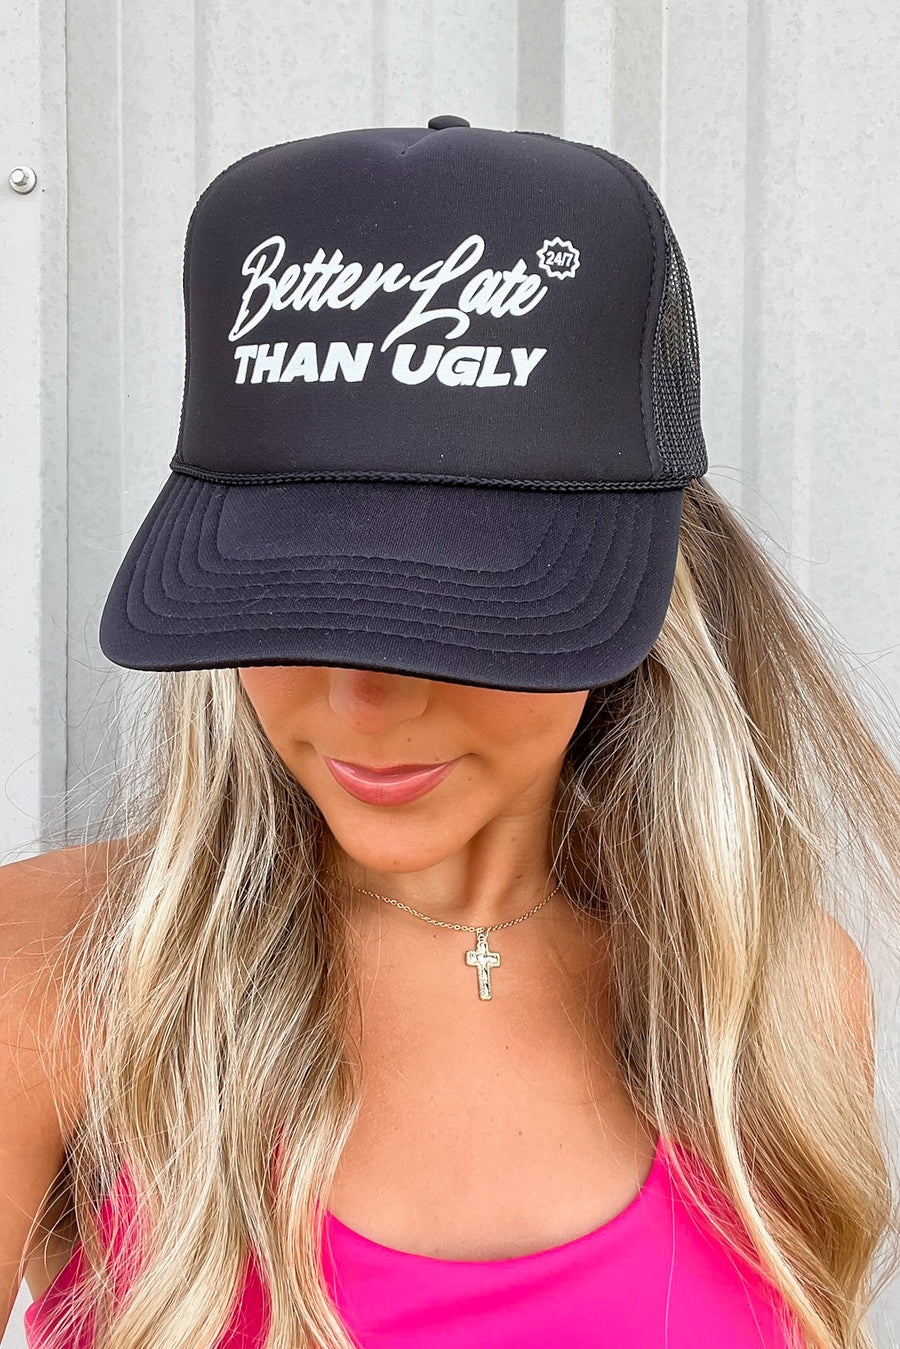  Better Late Than Ugly Graphic Trucker Hat - Madison and Mallory